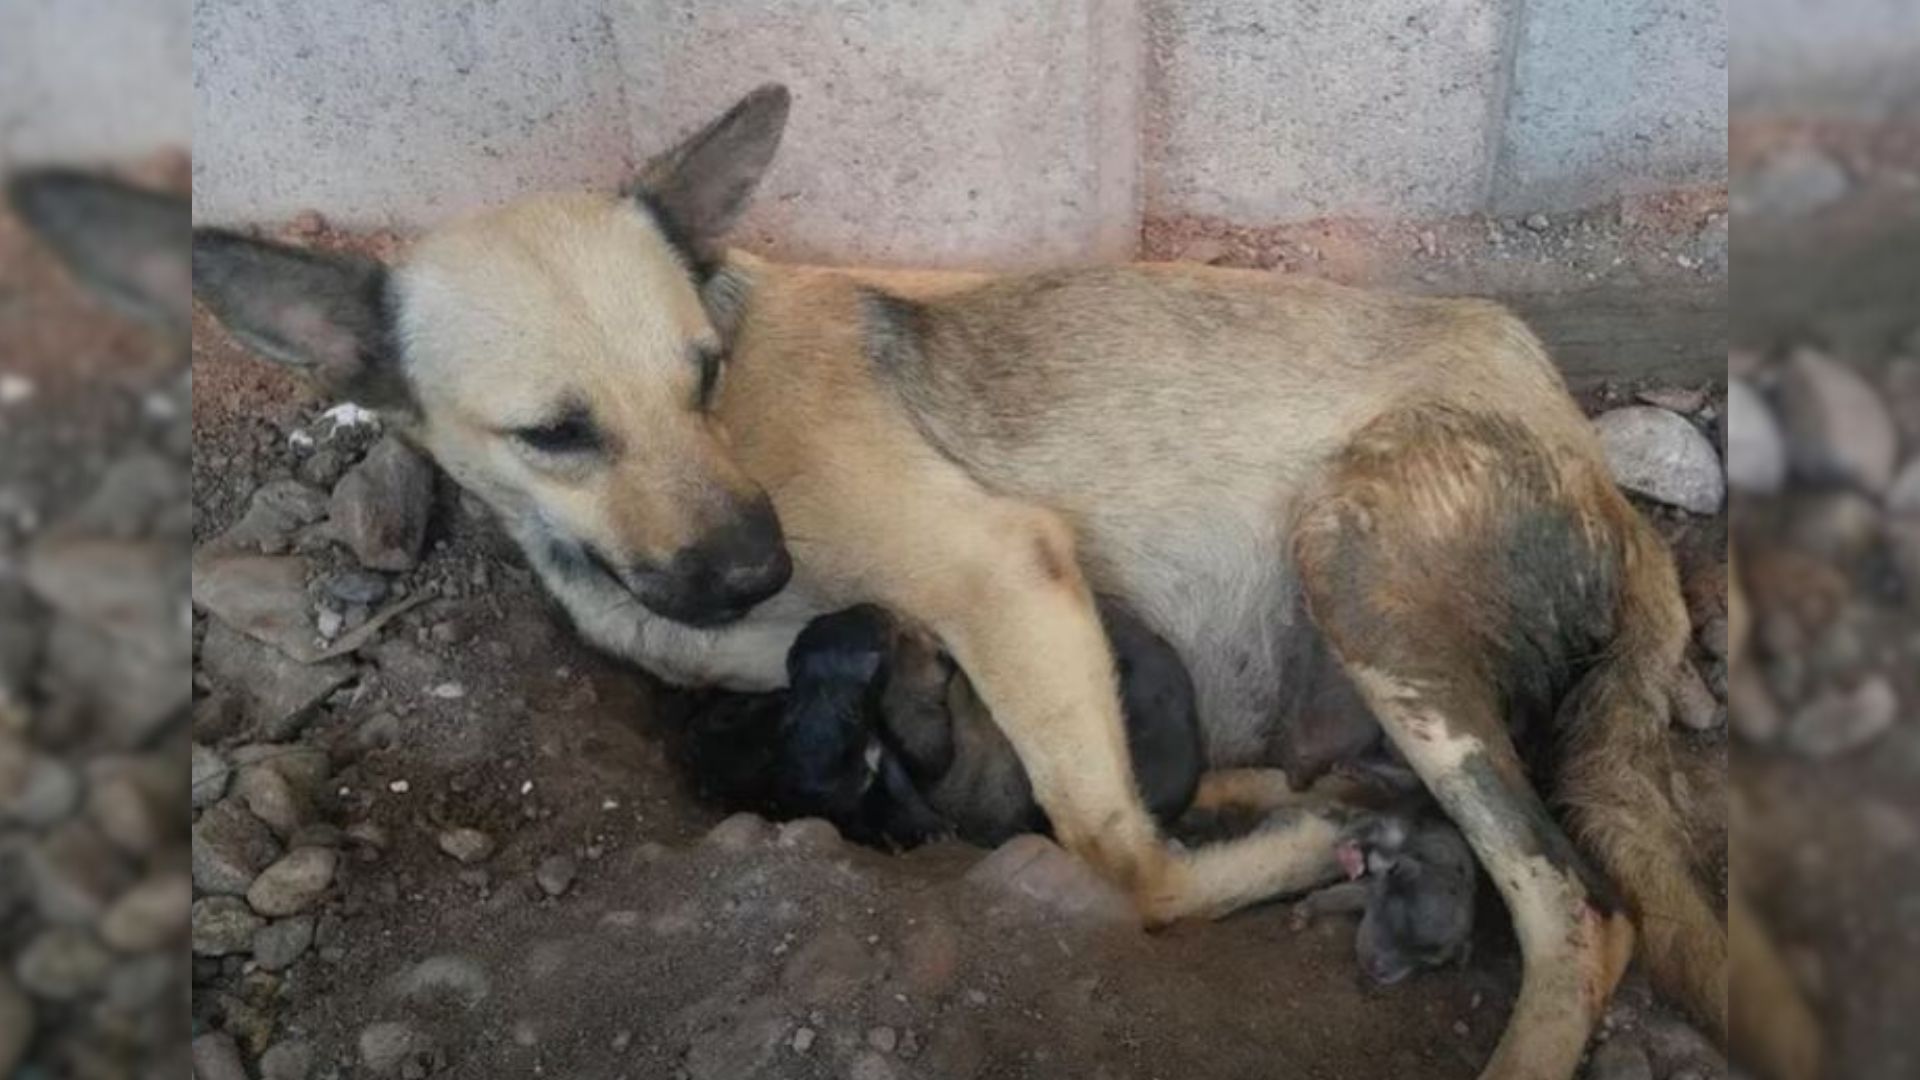 Pregnant Dog Abandoned By Owner Was Struggling To Care For Her Babies Until Rescuers Arrived